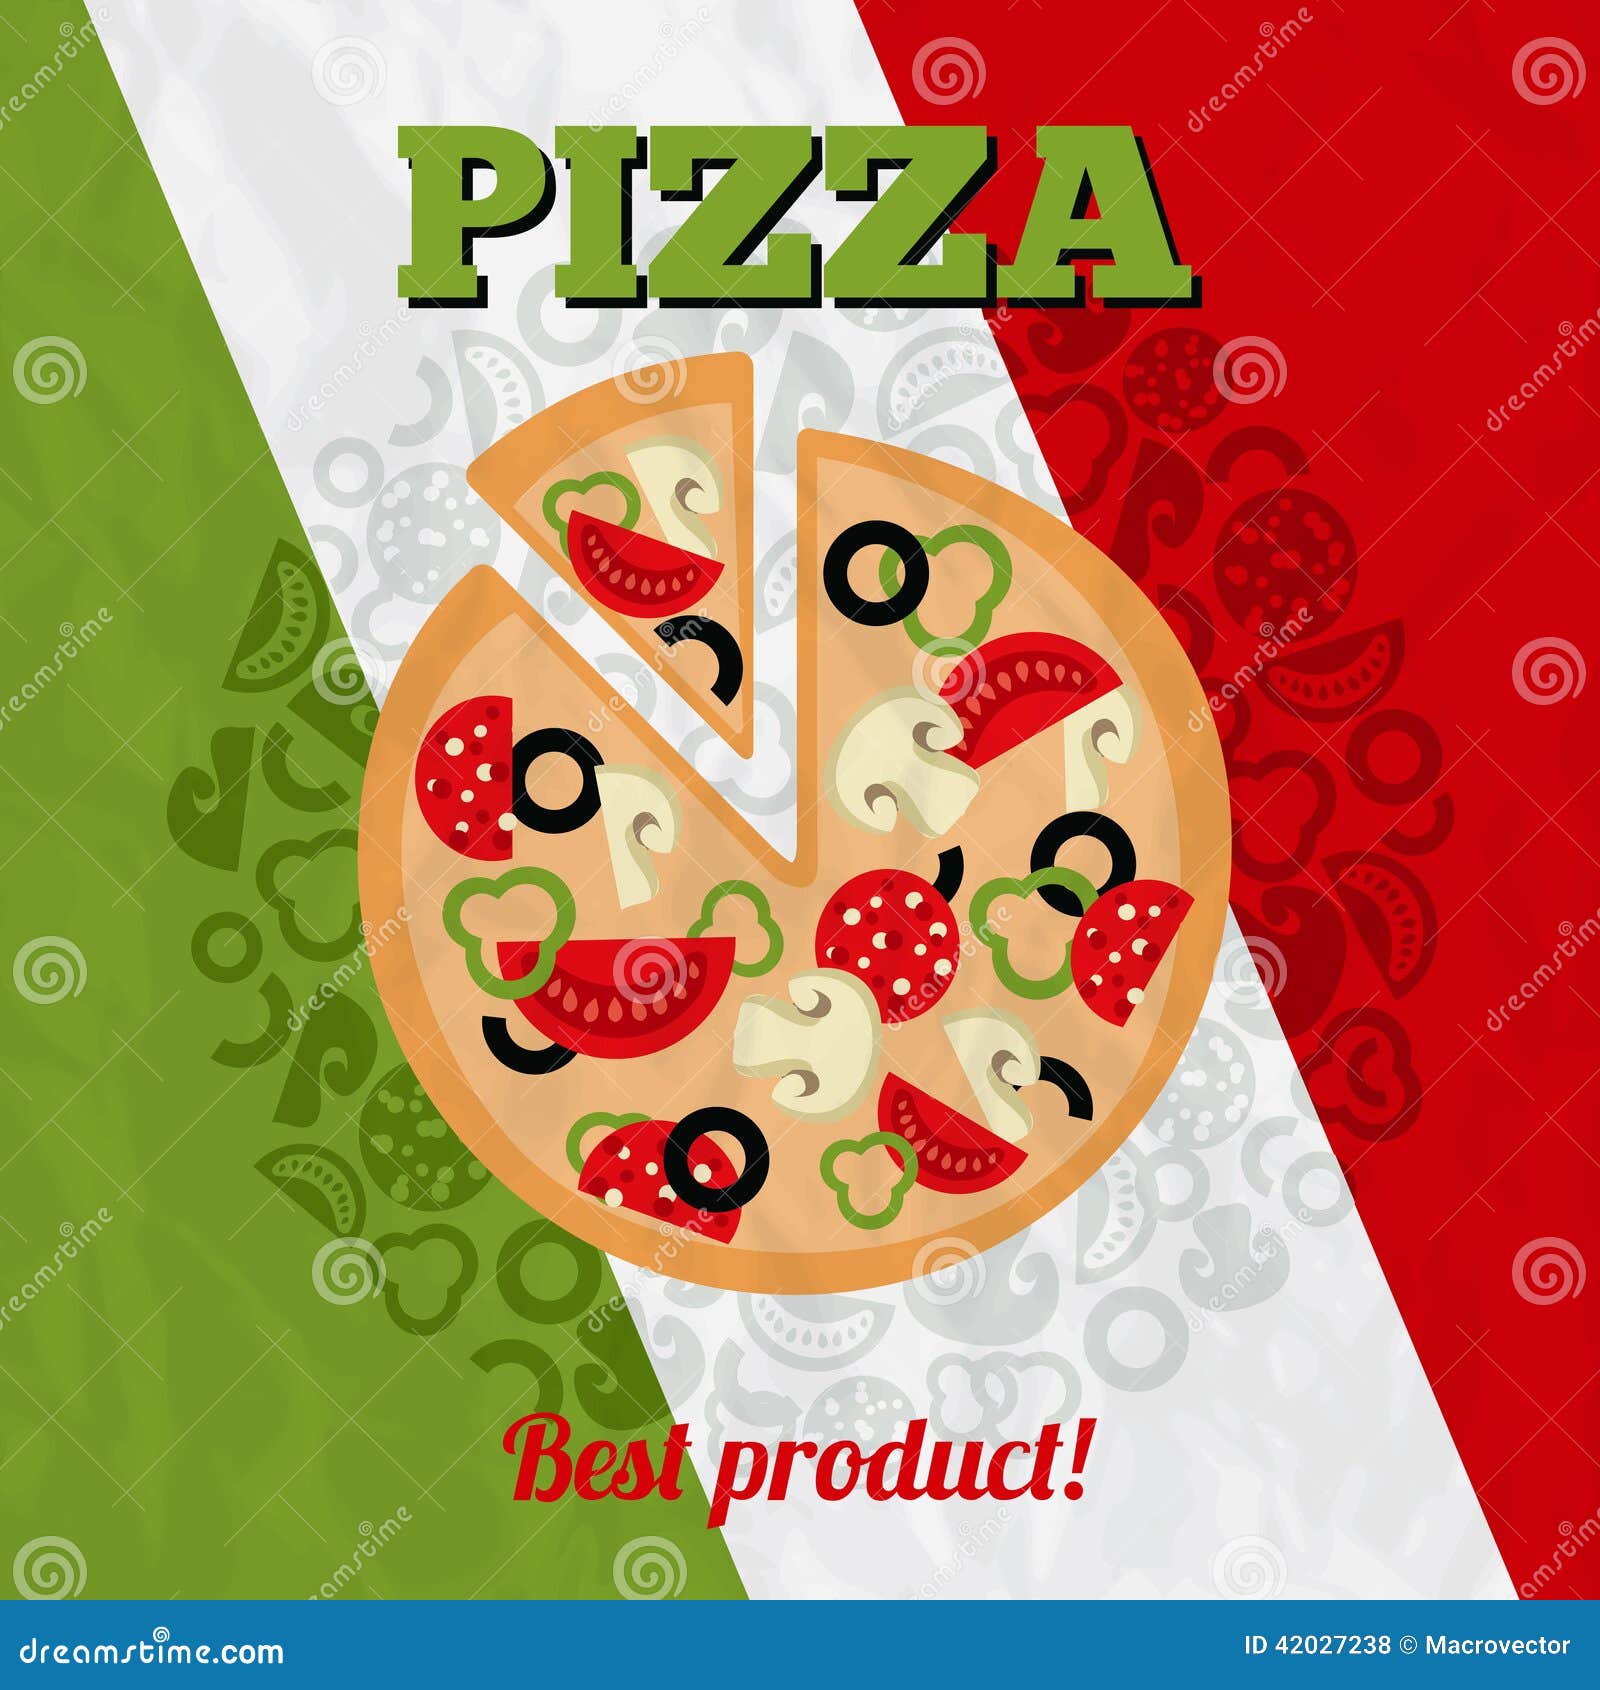 Italy pizza poster stock vector. Illustration of italy ...